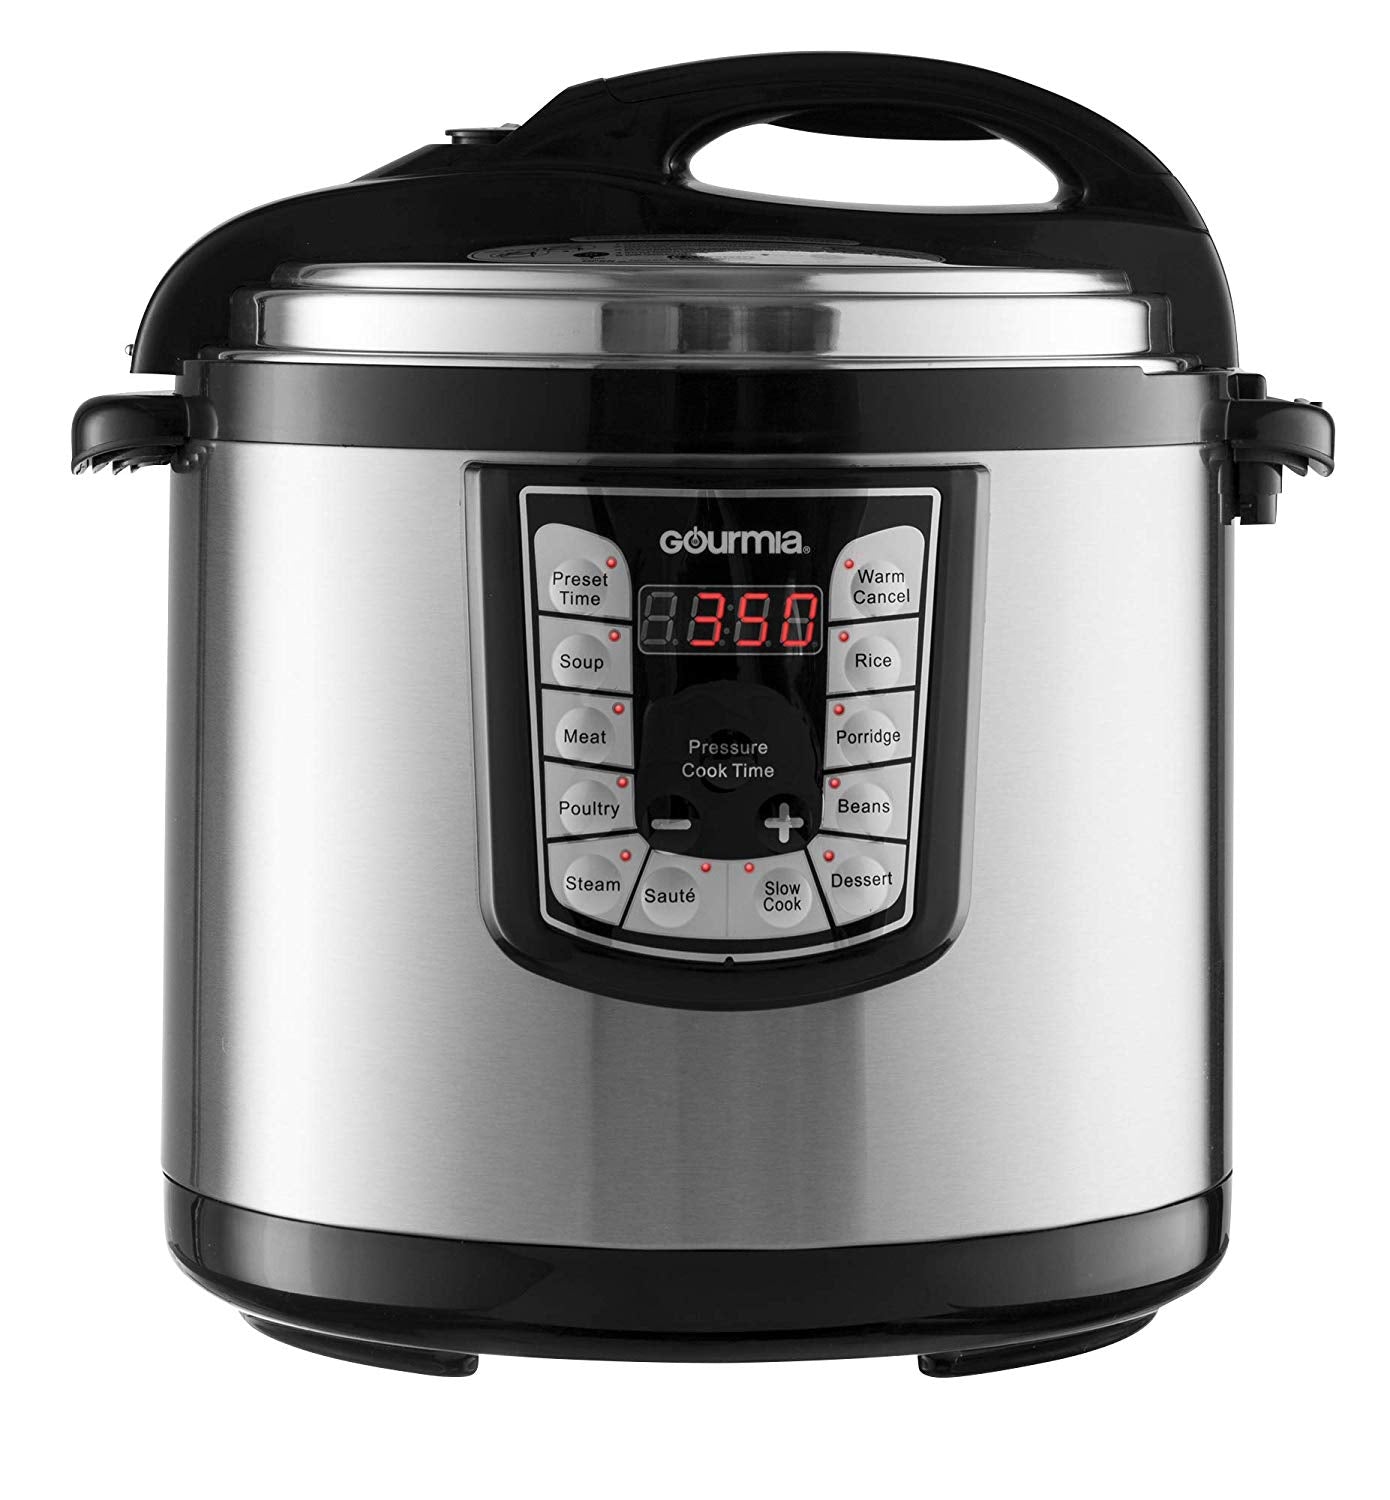 Gourmia GPC1000 Smart Pot Electric Digital Multifunction Pressure Cooker, 13 Programmable Cooking Modes, 10 Quart Stainless Steel, with Steam Rack, 1400 Watts- Includes Free Recipe Book - 110V